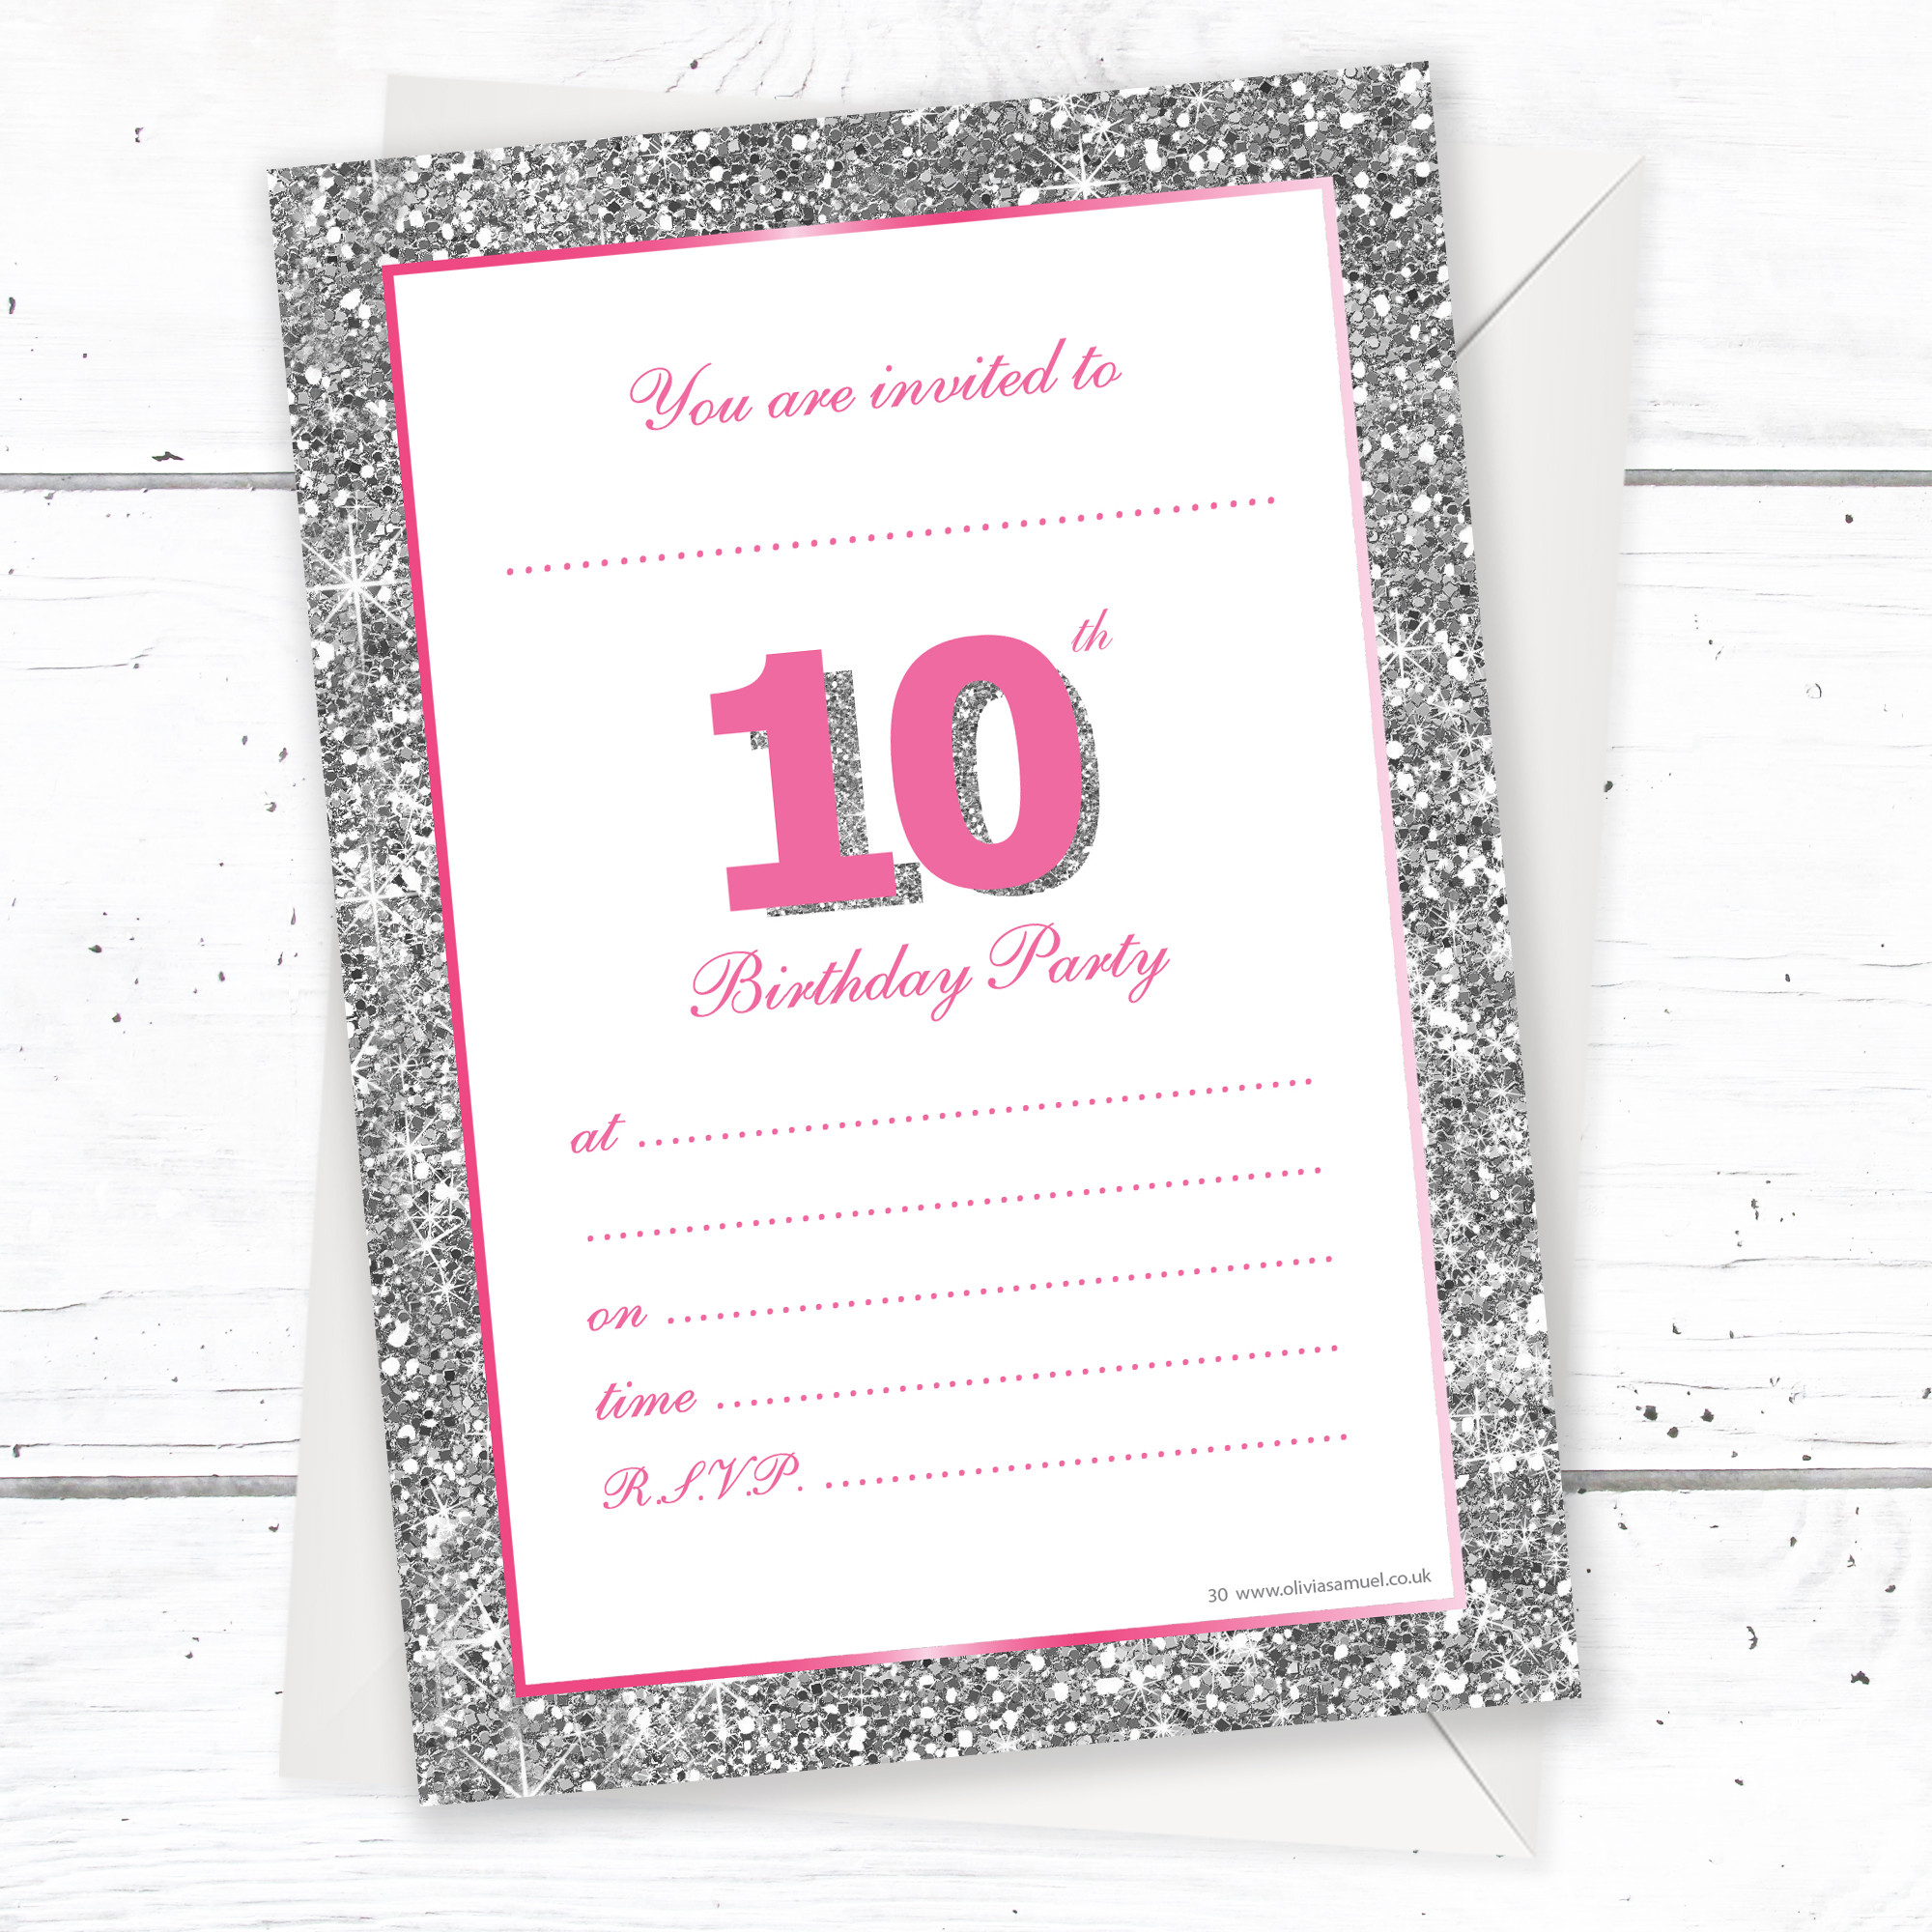 10th Birthday Party Invitations
 10th Birthday Party Invitations – Pink Sparkly Design and